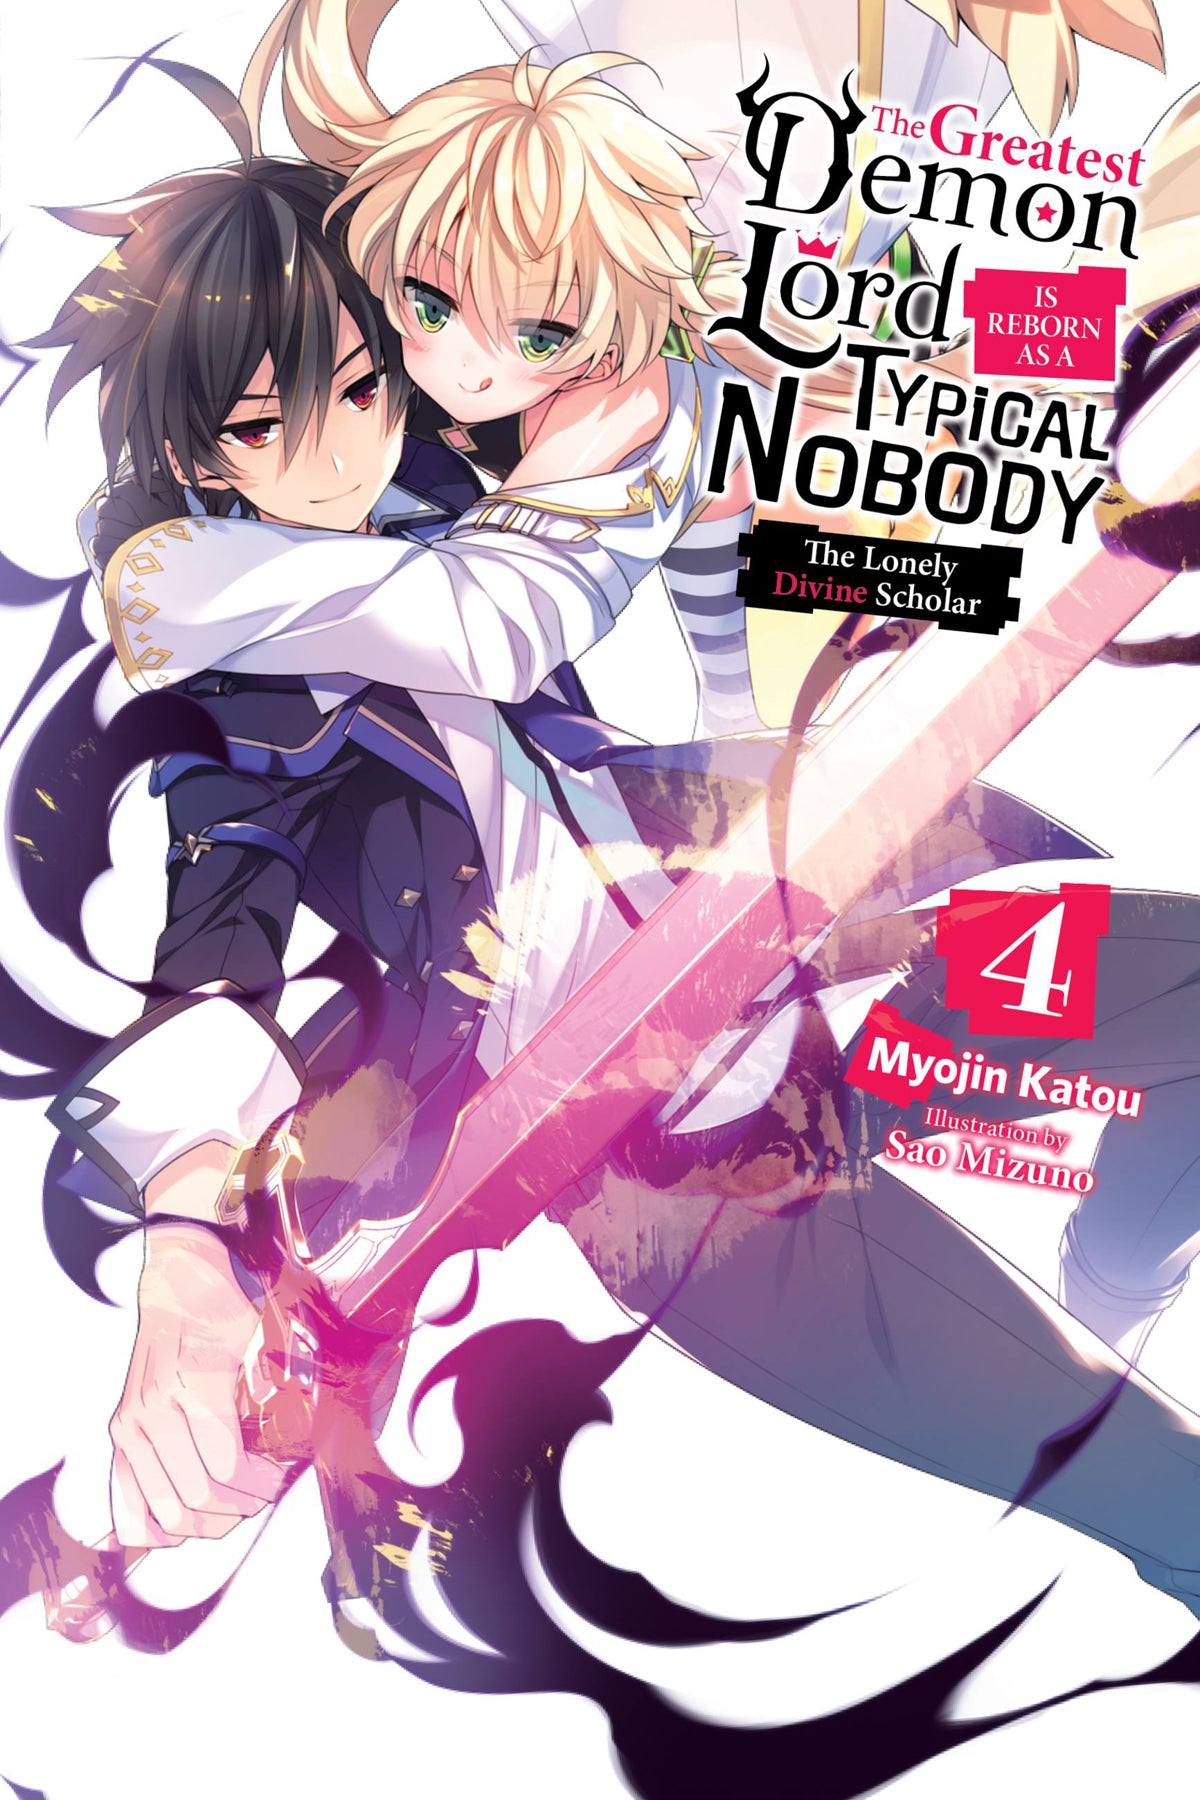 The Greatest Demon Lord Is Reborn as a Typical Nobody Vol. 04 (Light Novel): The Lonely Divine Scholar